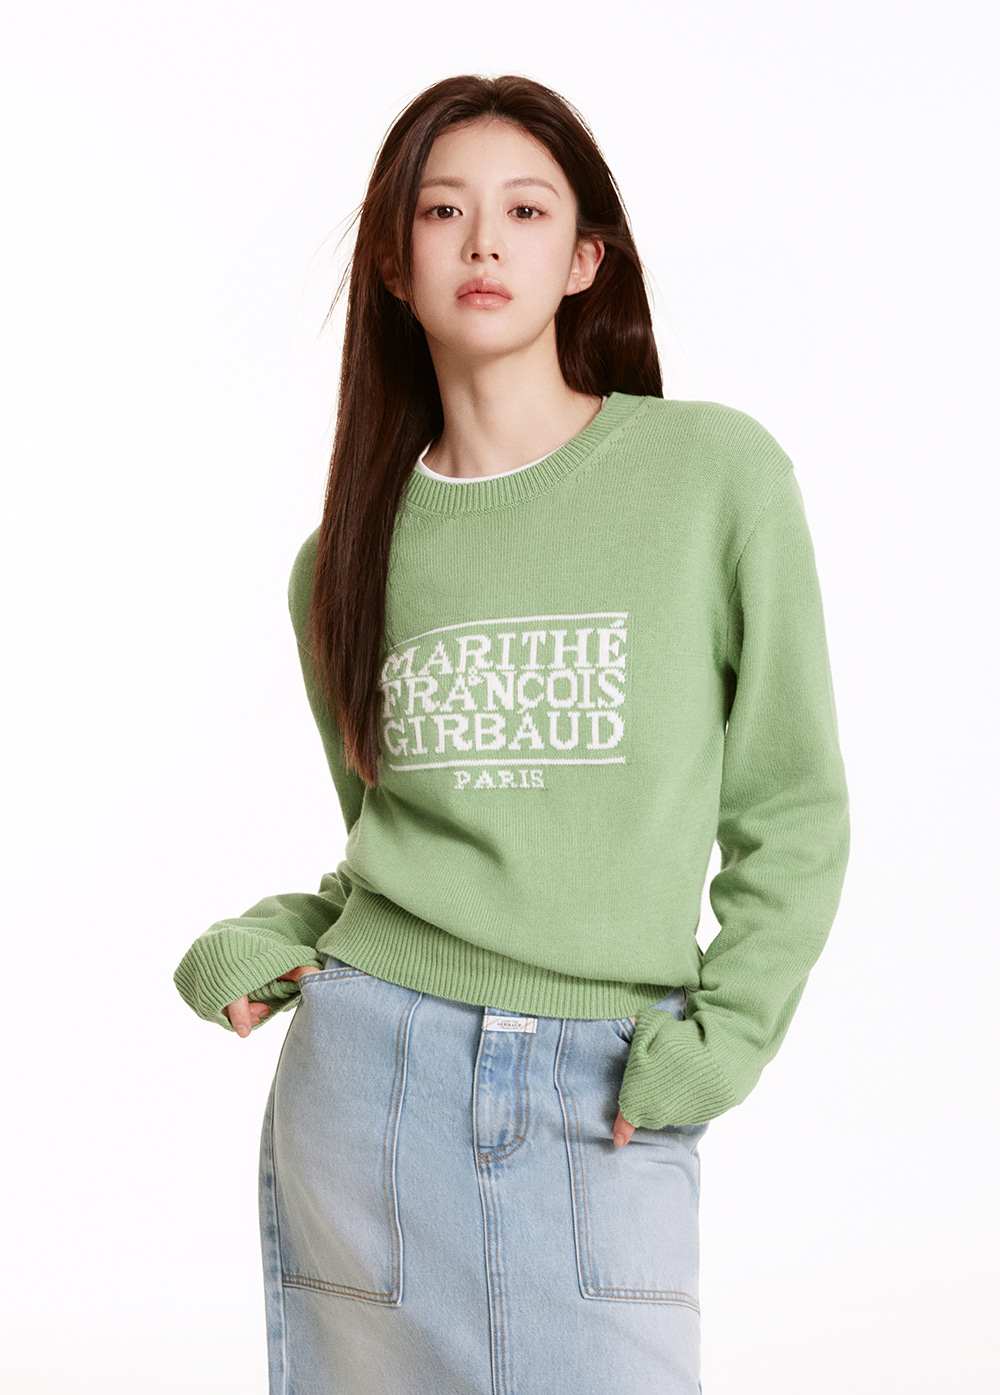 CLASSIC LOGO KNIT PULLOVER green - MARITHE FRANCOIS GIRBAUD